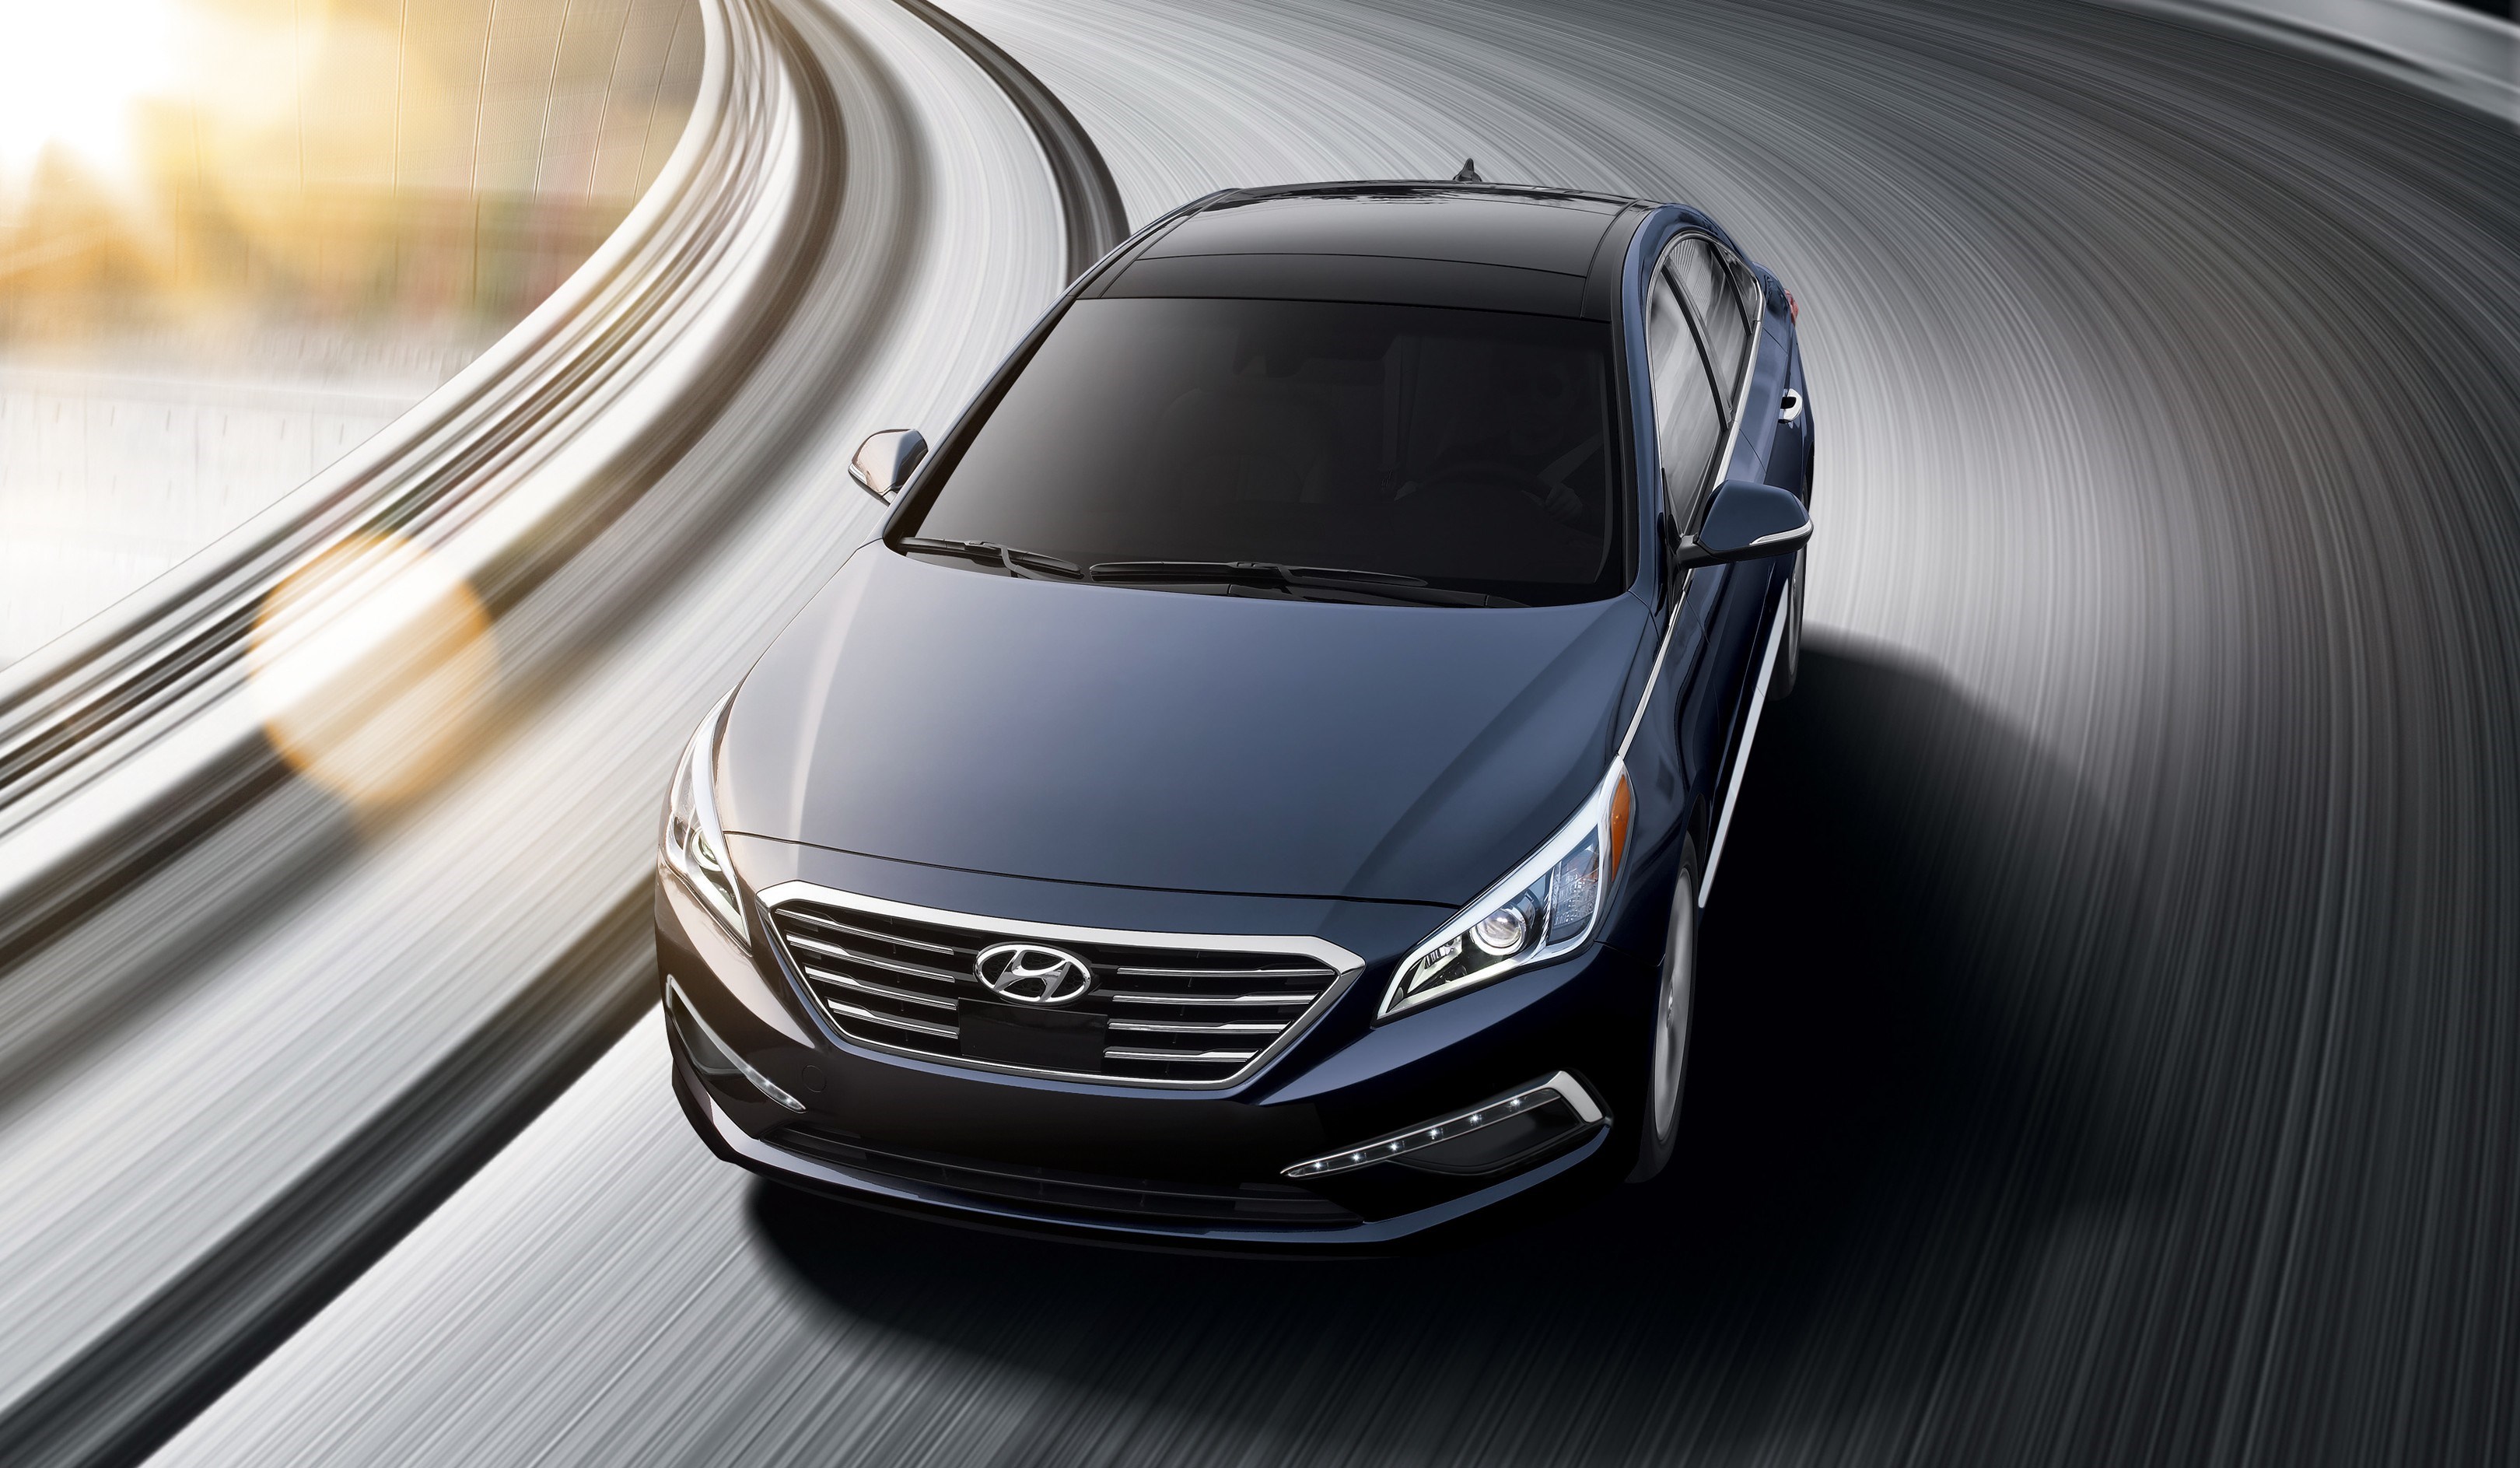 Hyundai to launch the first vehicle to come with Android Auto